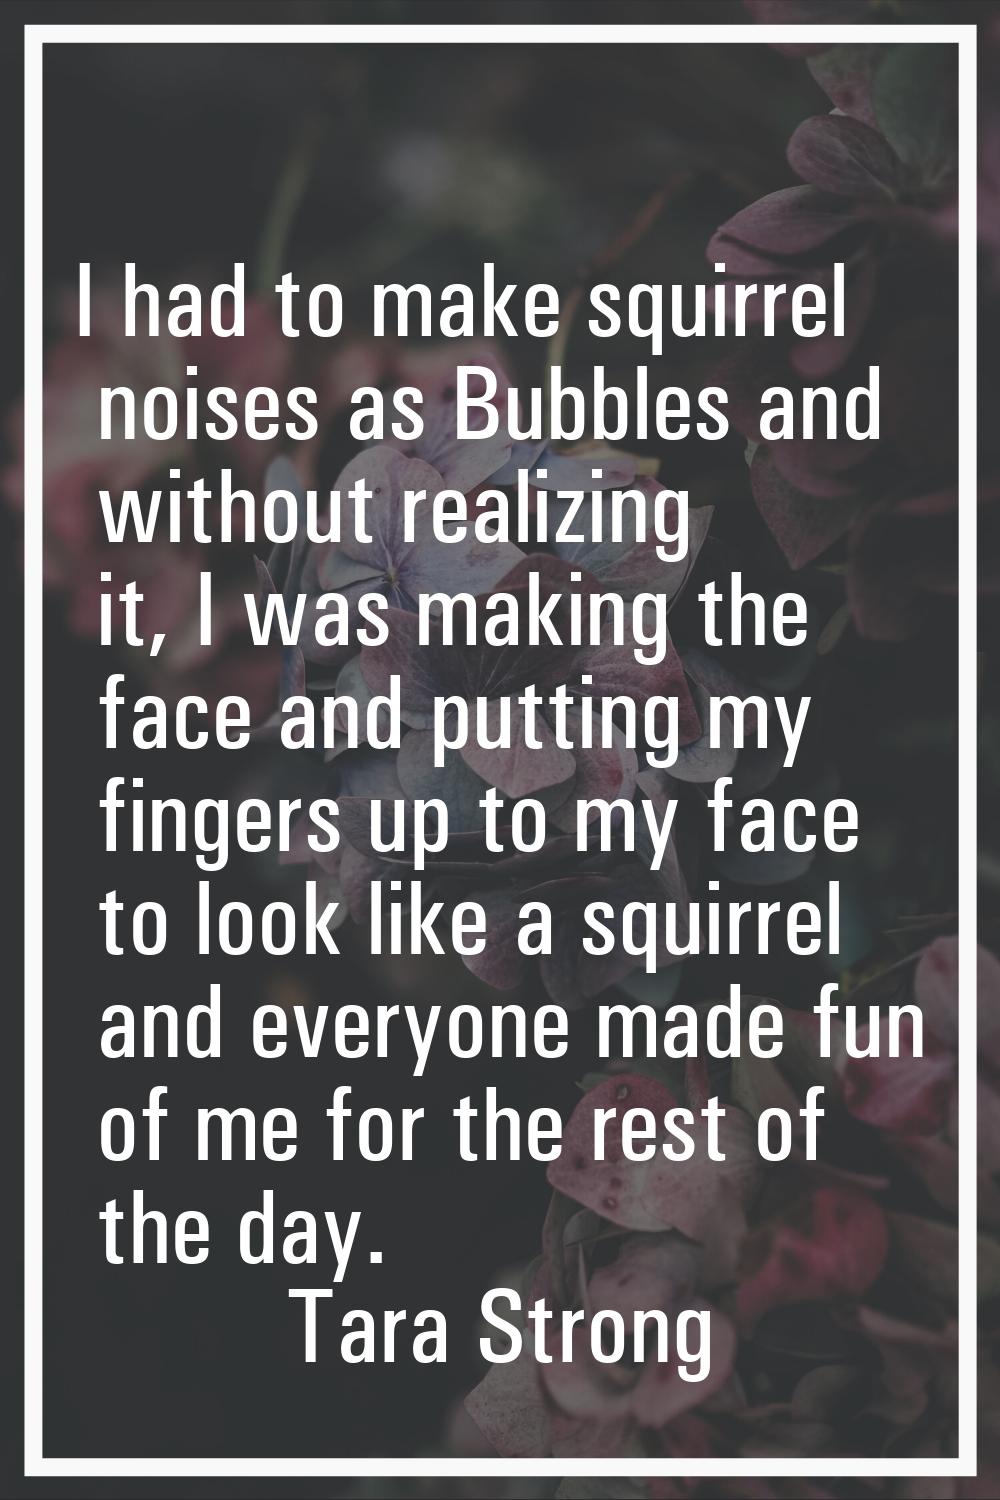 I had to make squirrel noises as Bubbles and without realizing it, I was making the face and puttin